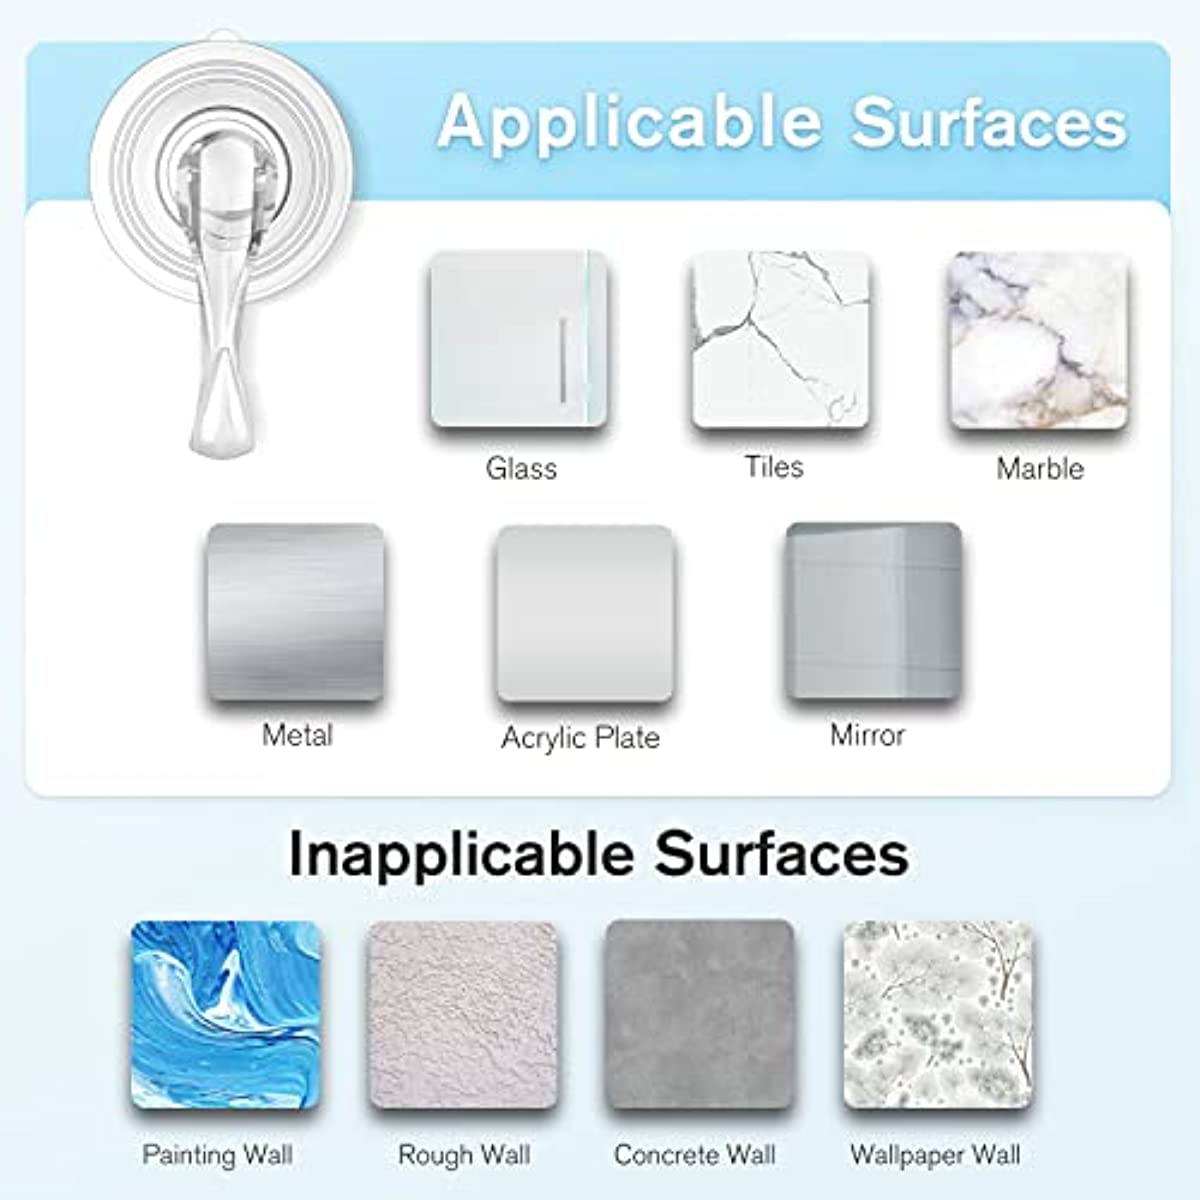 Suction Cup Hooks, Small Clear Removable Heavy Duty Suction Hooks Strong  Window Glass Door Suction Cup Hangers Kitchen Bathroom Shower Wall Hooks  For